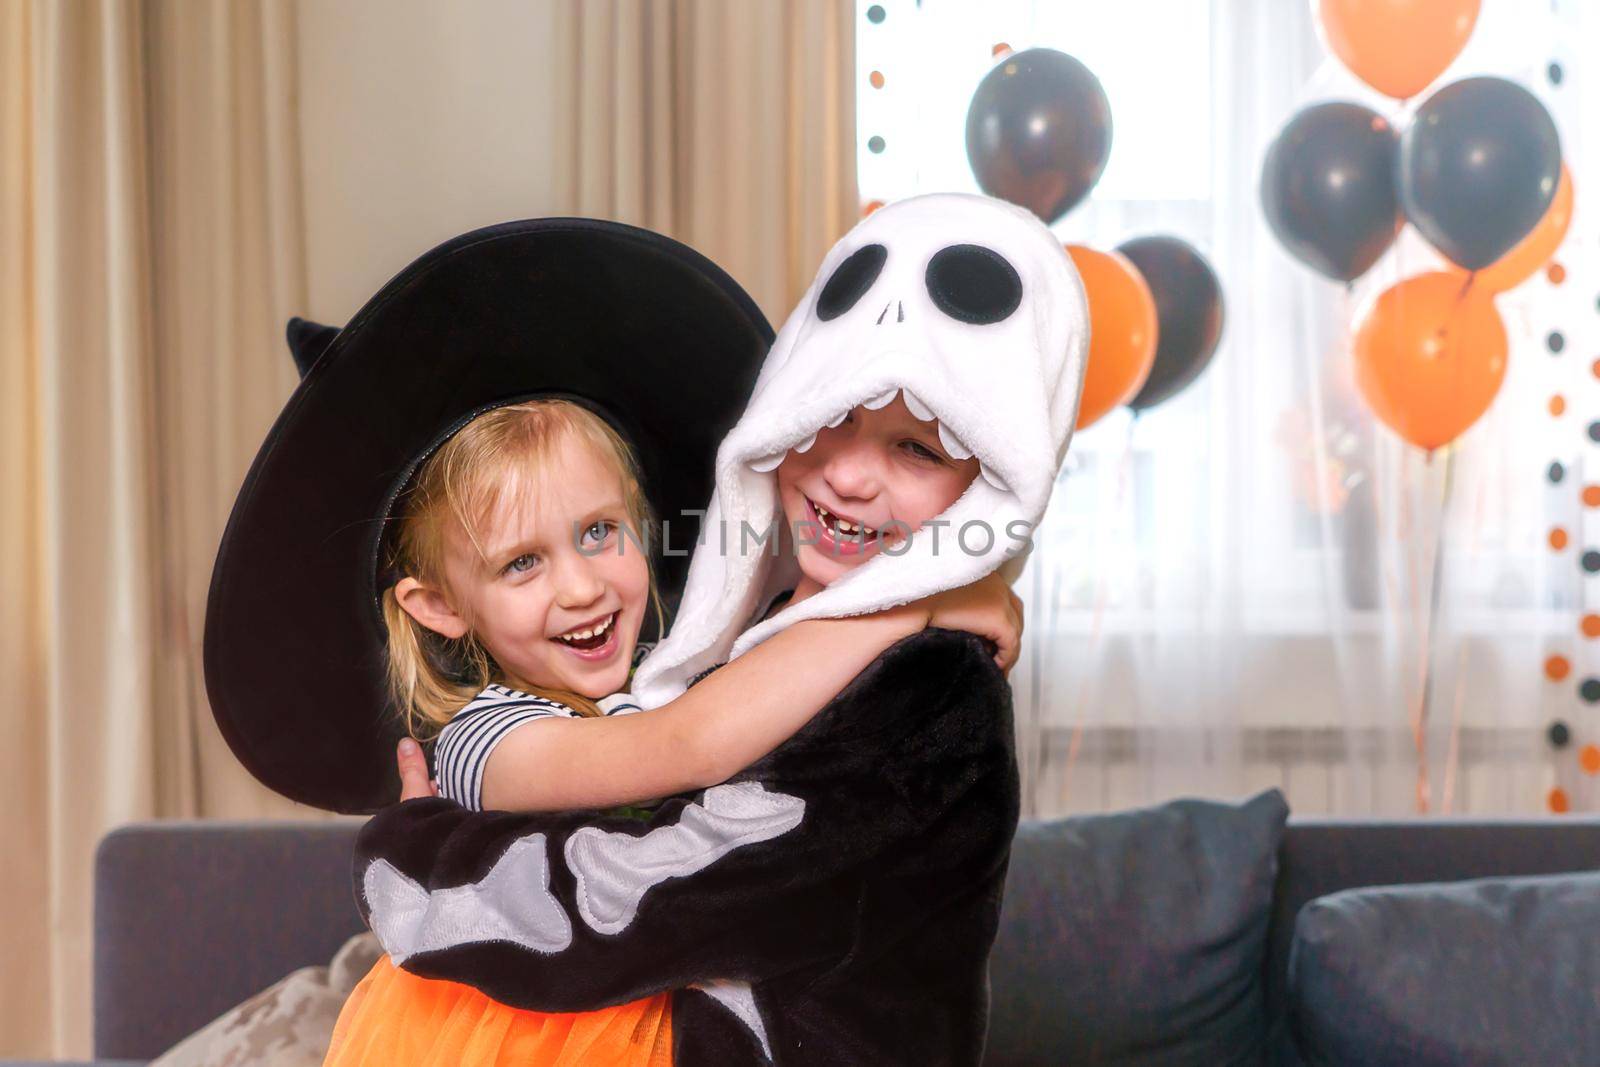 Close-up portrait of boy and girl dressed as a witch and a skeleton. Children hugging and laughing happily, Halloween house party. Against the background of orange decorations and balloons, copy paste